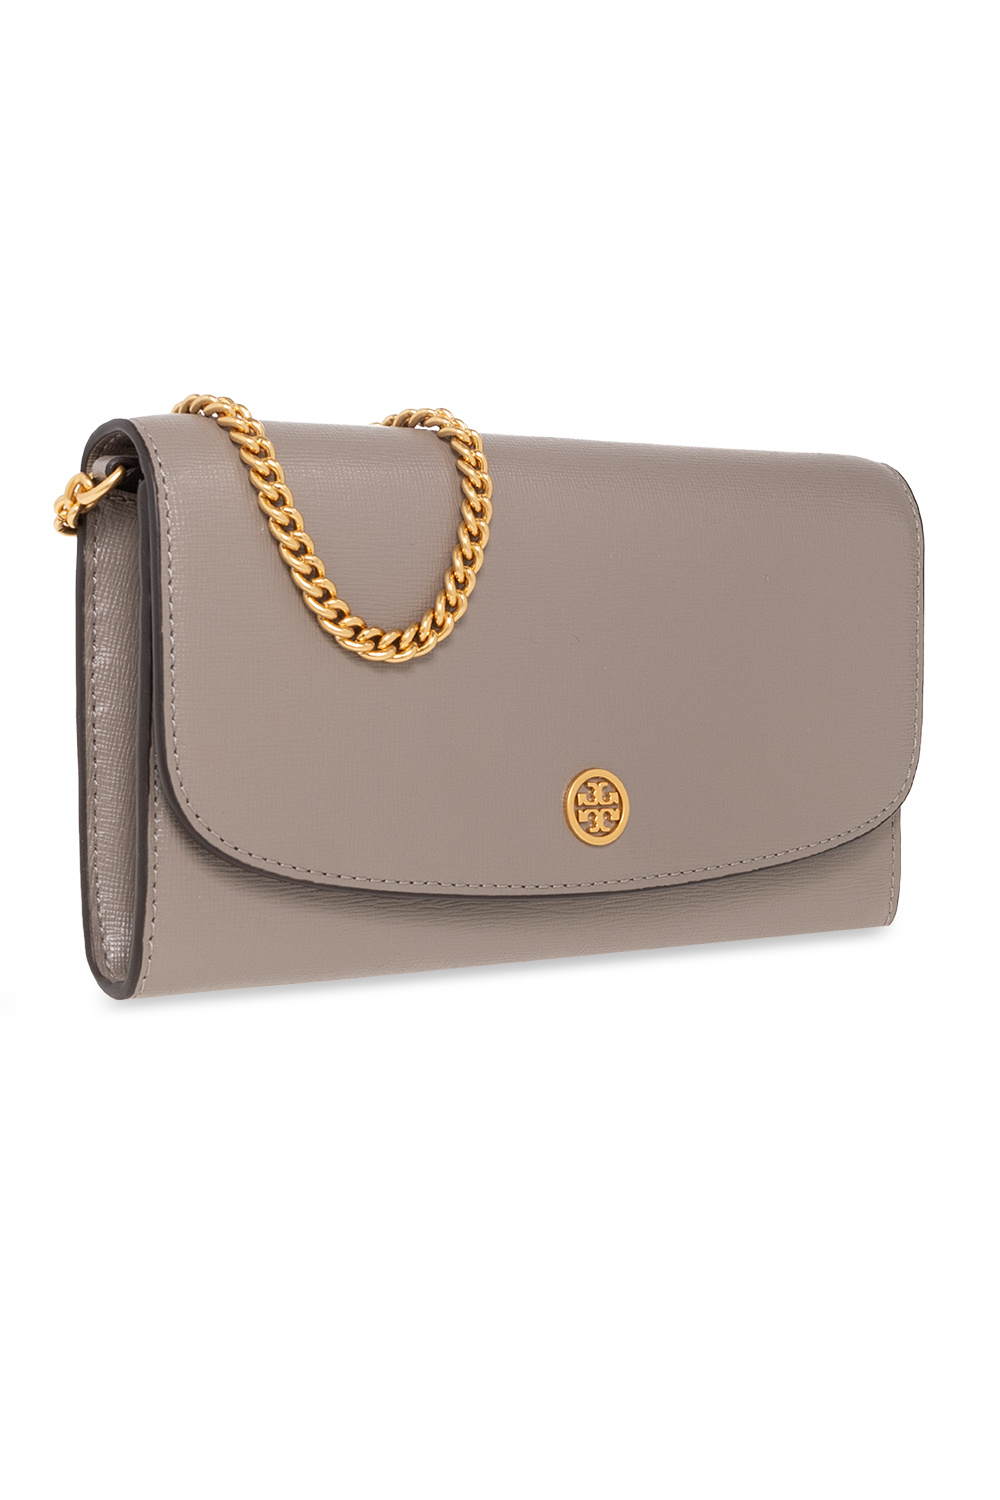 Tory Burch Leather wallet with logo | Women's Accessories | Vitkac